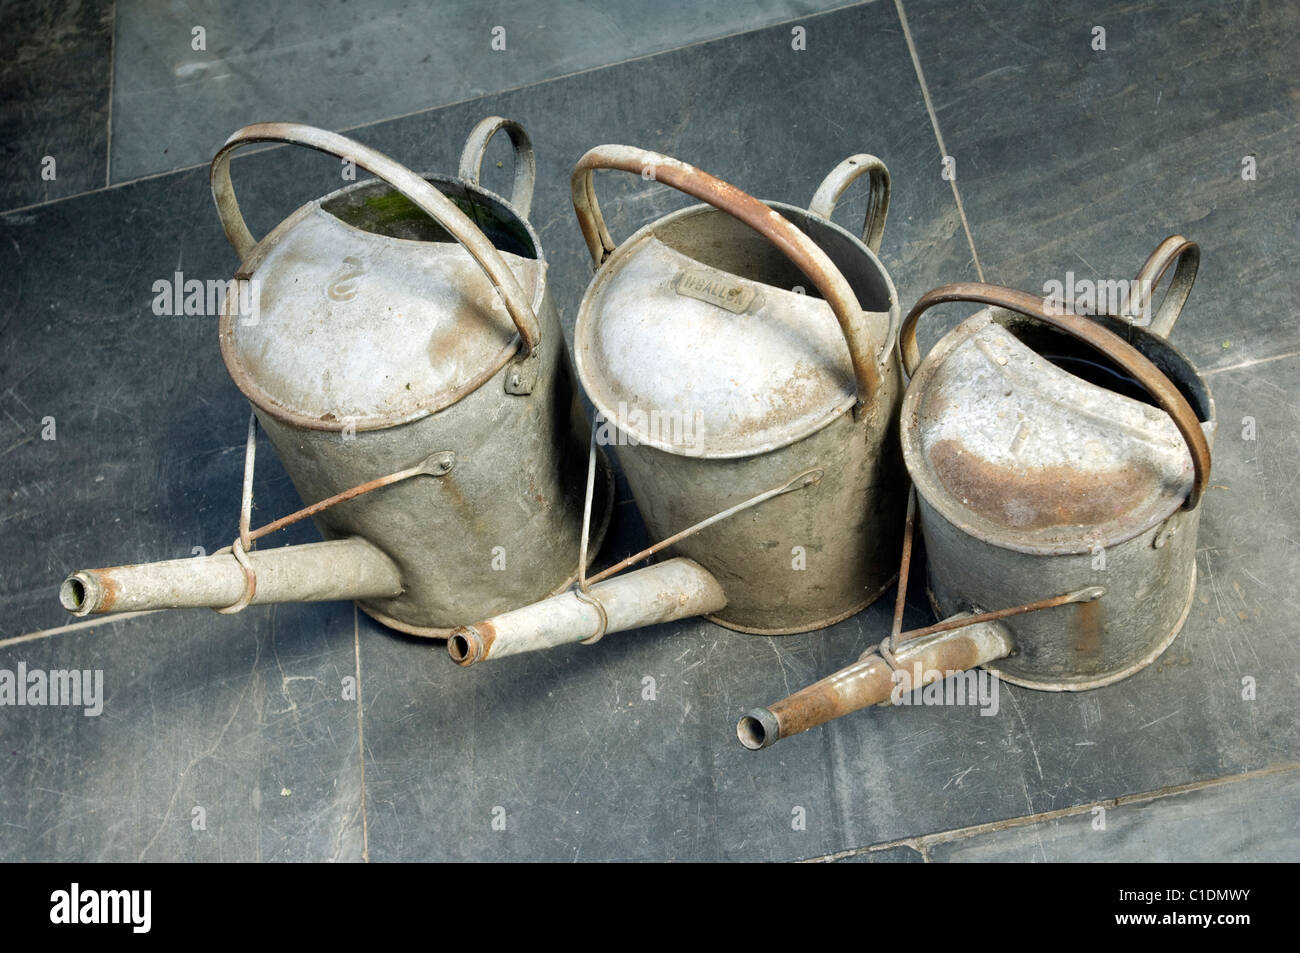 Three galvanised gardeners Watering Cans, a One Gallon, One and a Half Gallon and a Two Gallon on a slate floor. Stock Photo